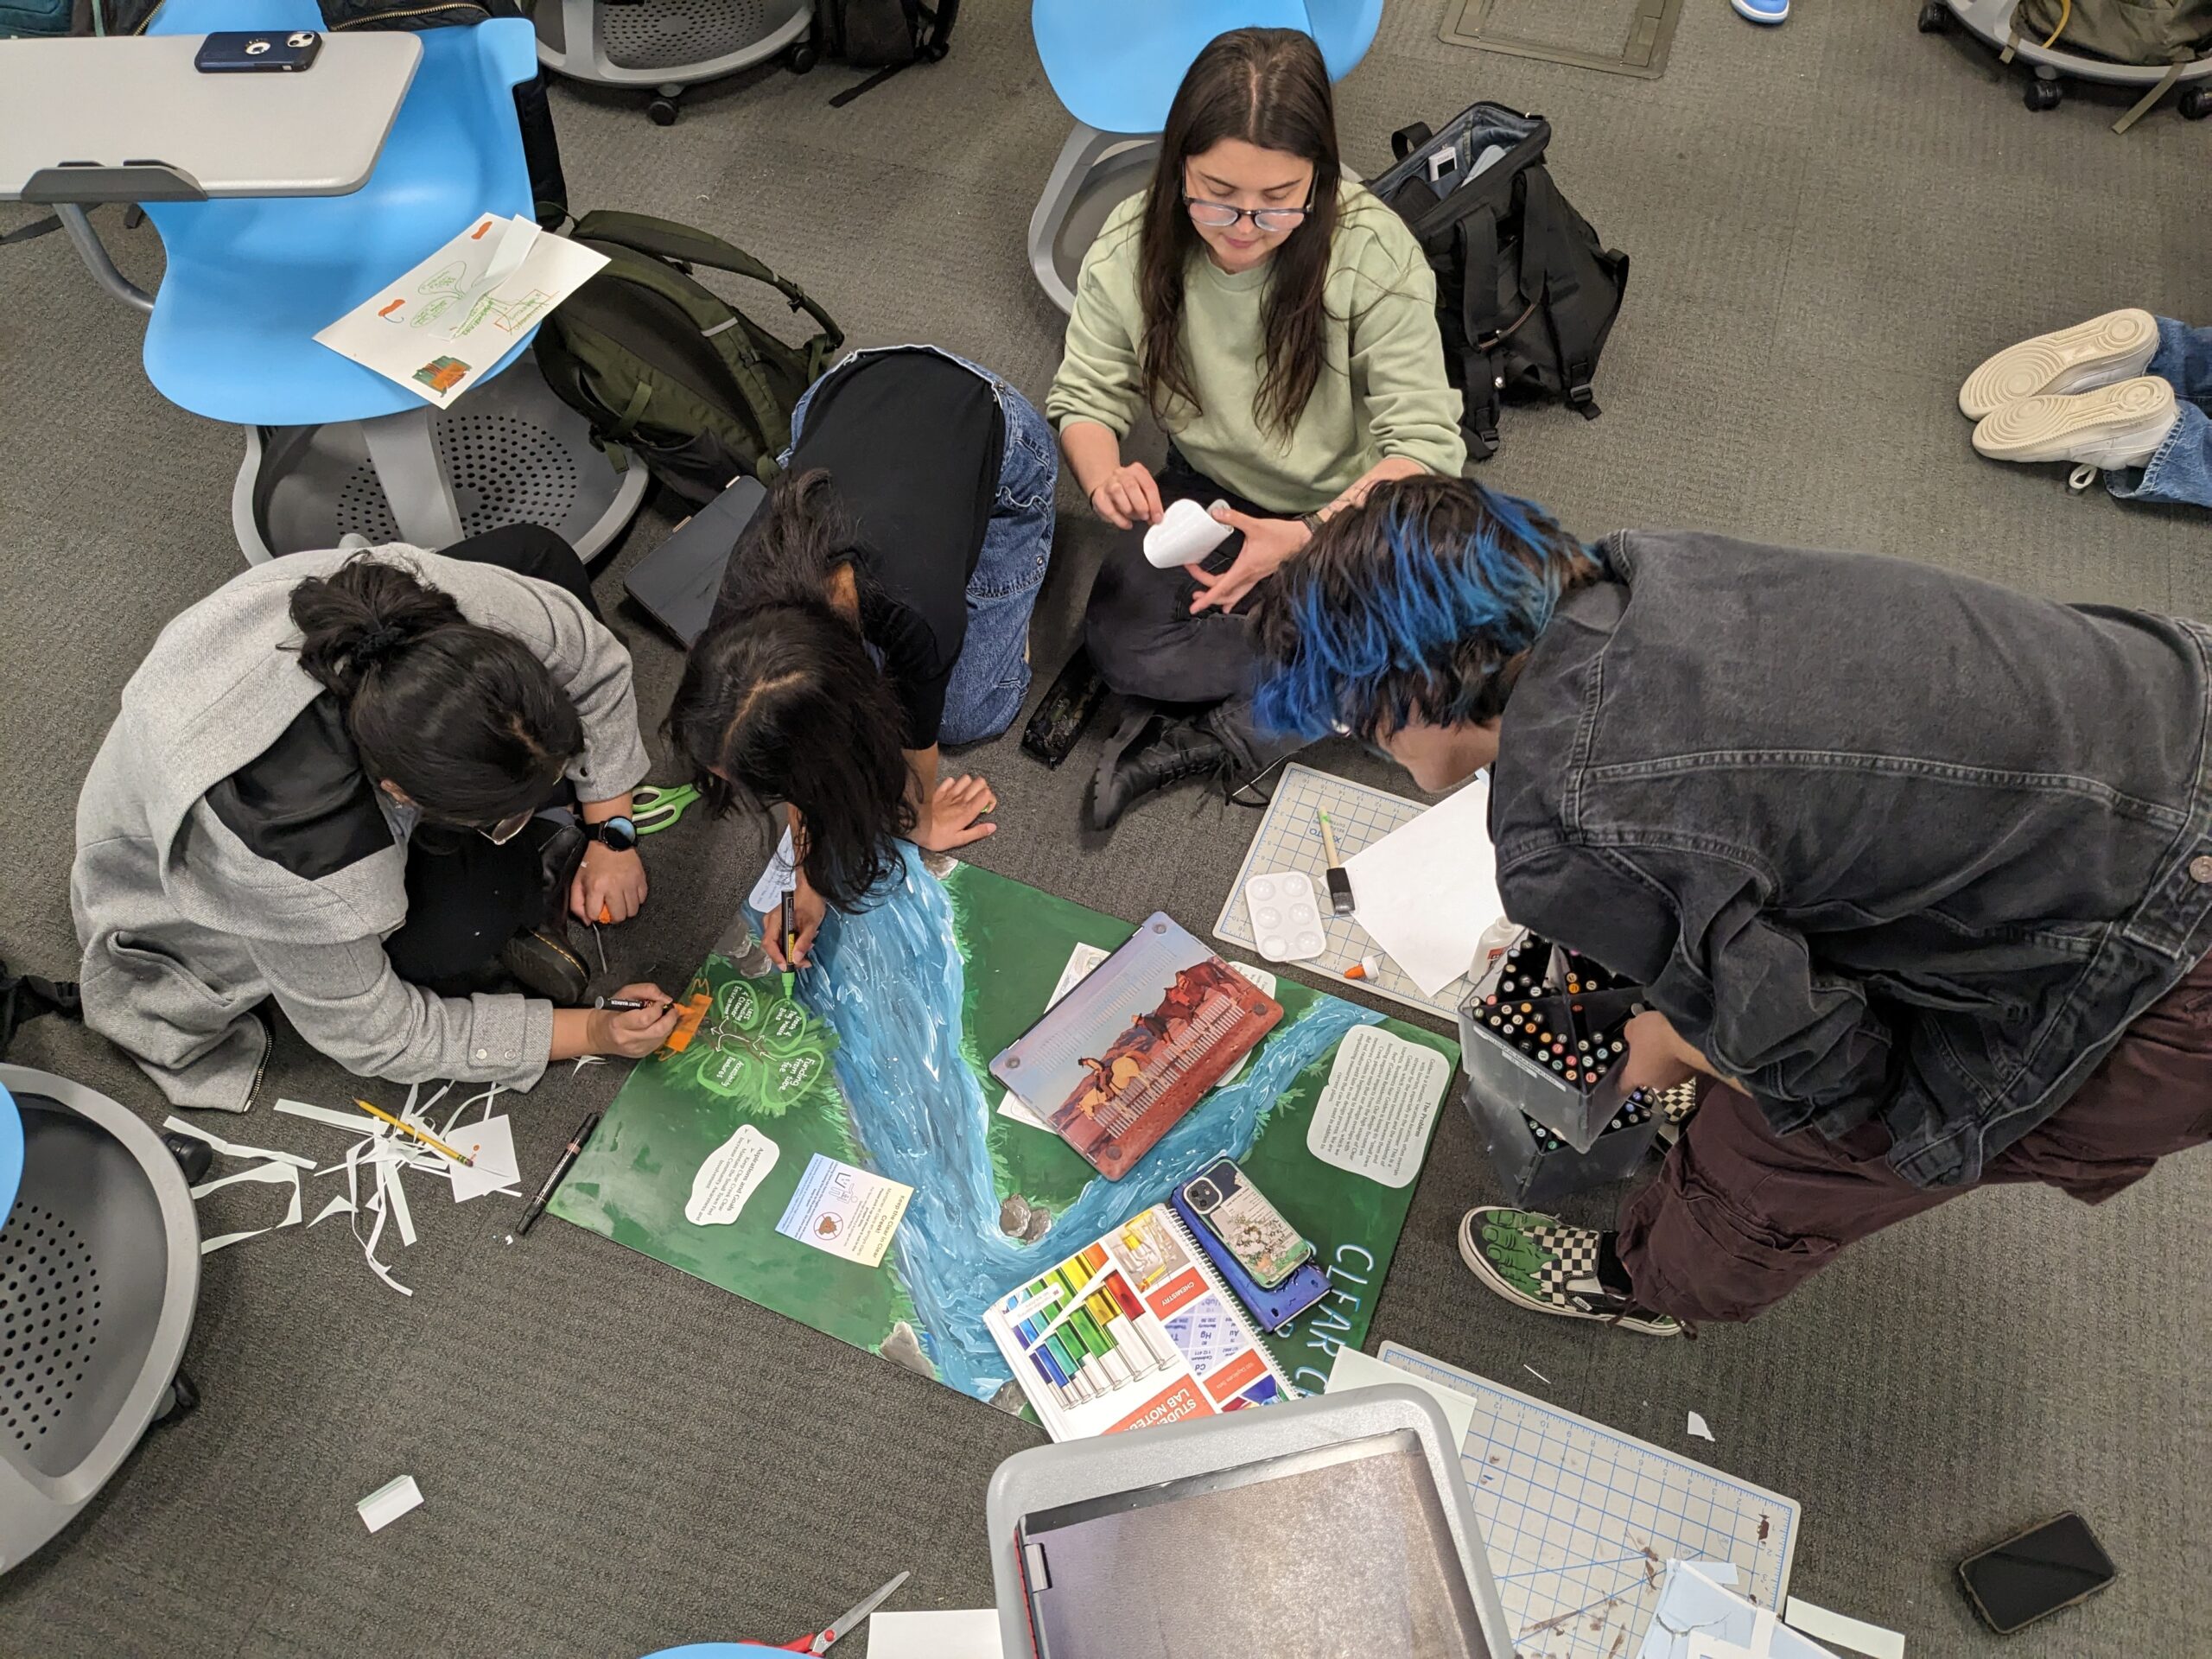 Group of Students Creating a Map Together